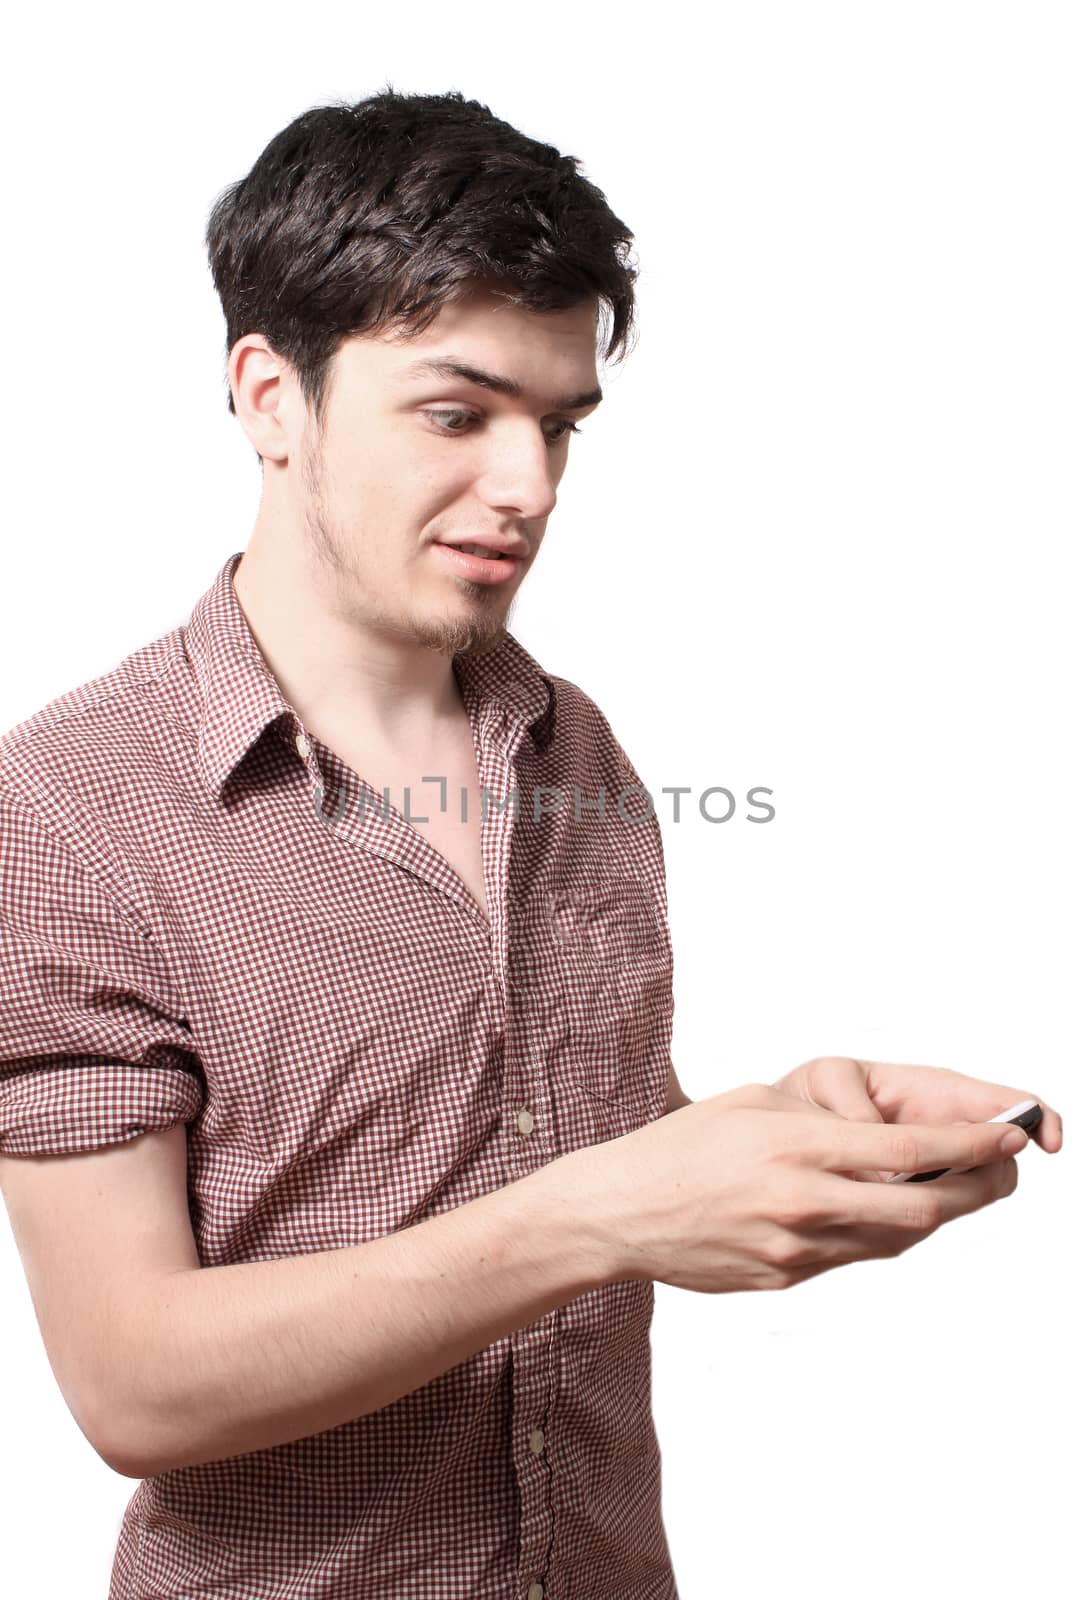 Eighteen year old young man holding his cellphone on a white background with surprised or astonished look on his face